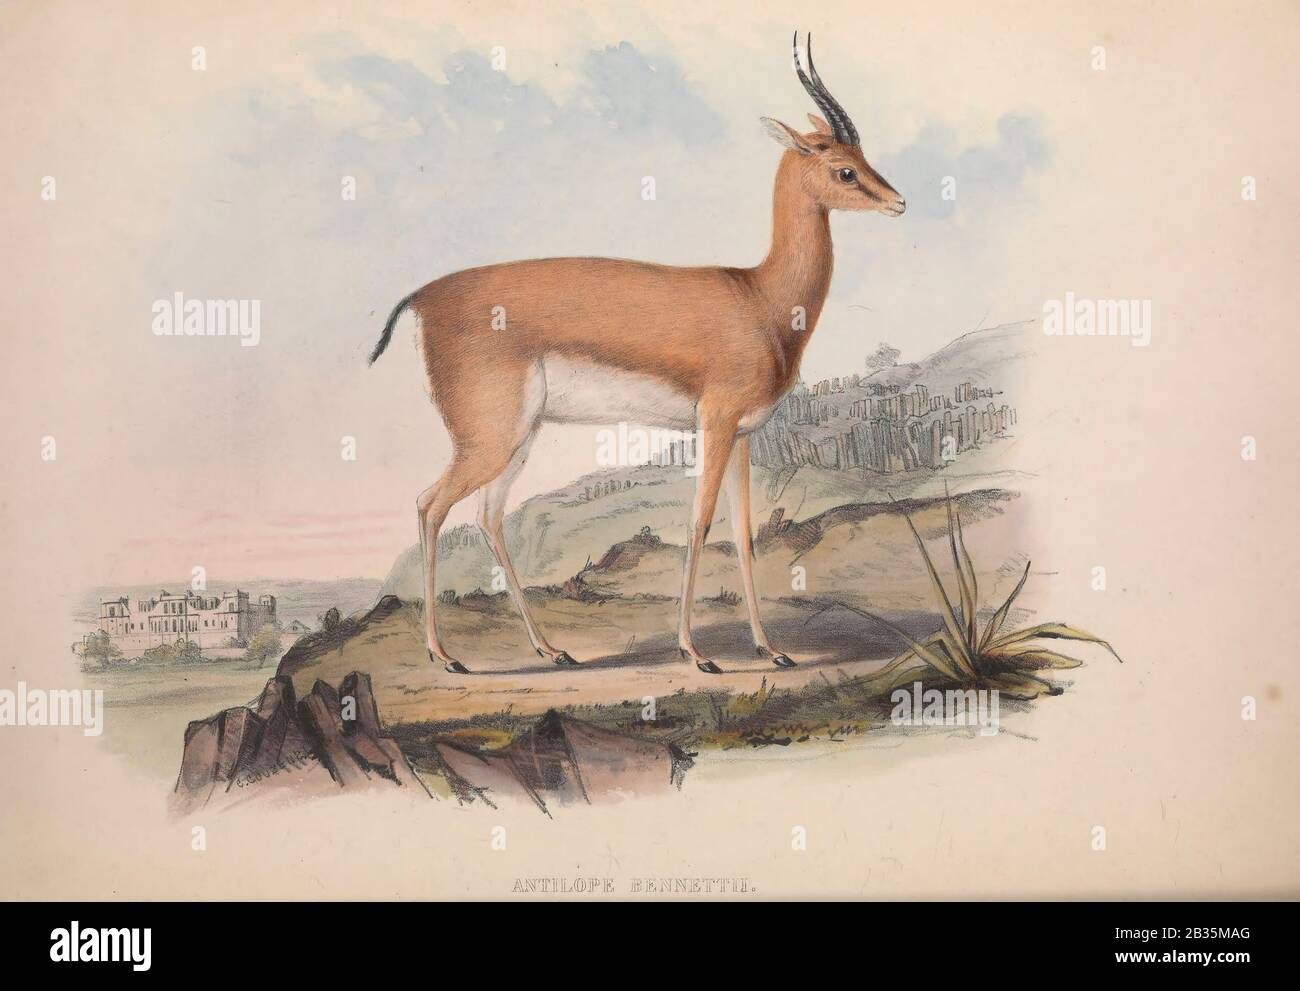 Antelope From the book Zoologia typica; or, Figures of new and rare animals and birds described in the proceedings, or exhibited in the collections of the Zoological Society of London. By Fraser, Louis. Zoological Society of London. Published by the author in London, March 1847 Stock Photo